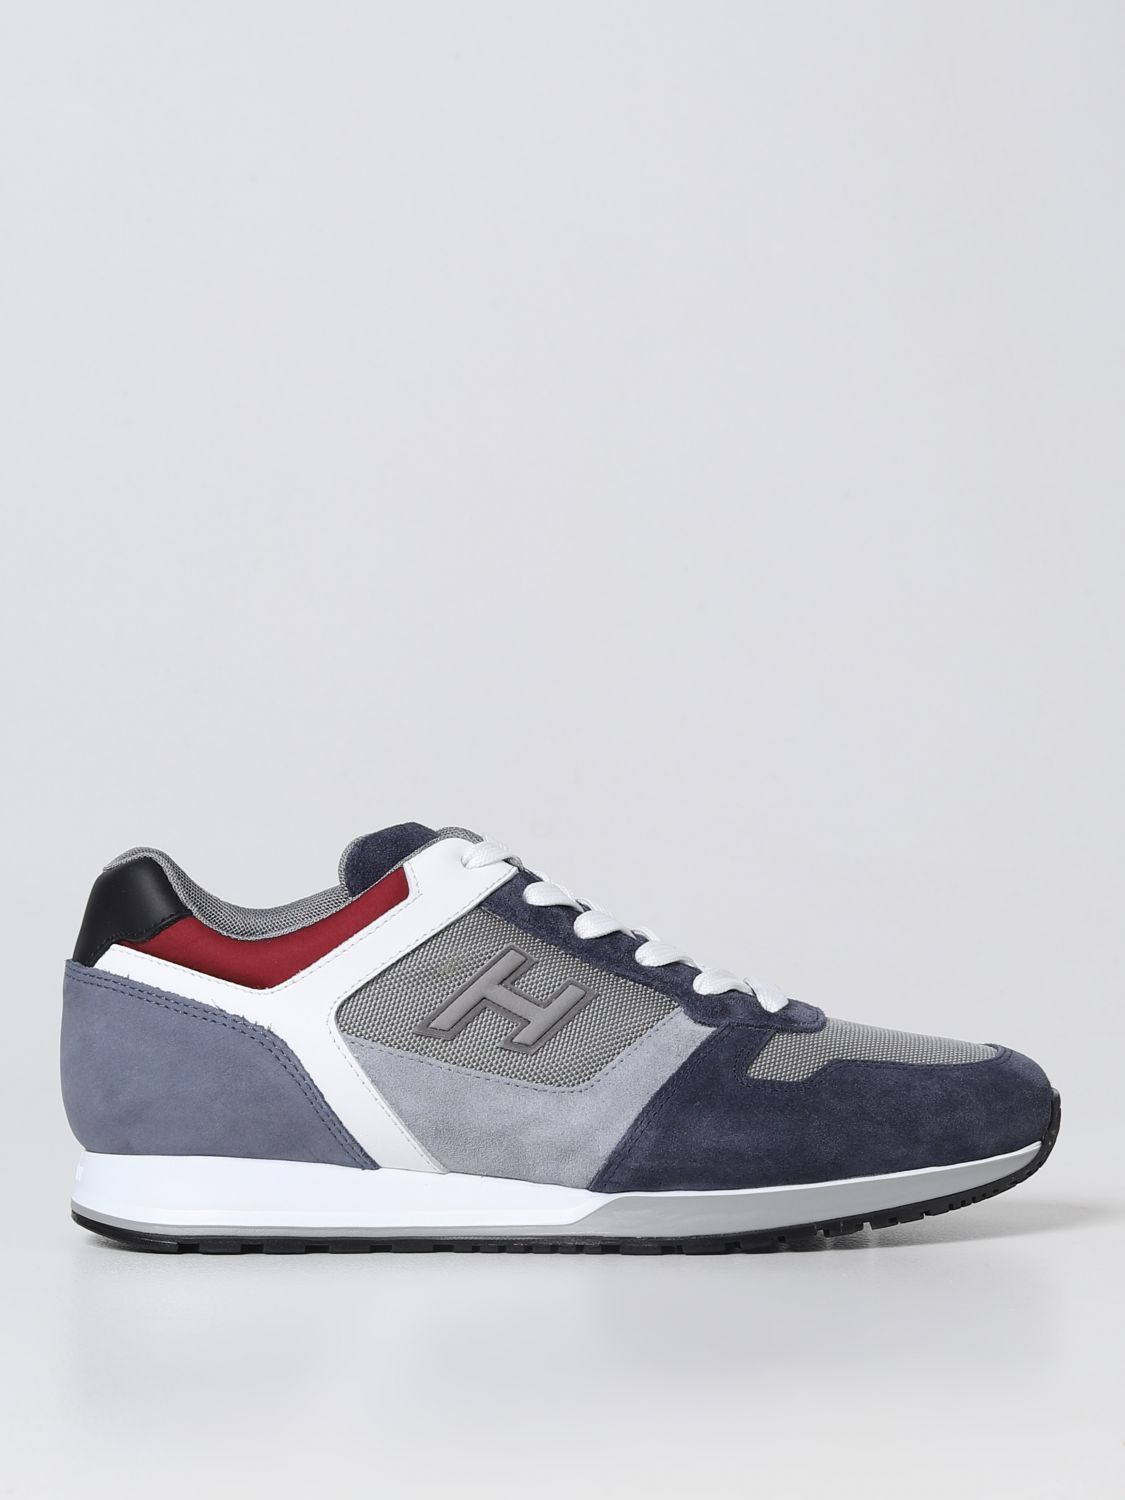 Hogan Outlet: Sneakers H321 in pelle e tessuto - Grigio | Sneakers ...